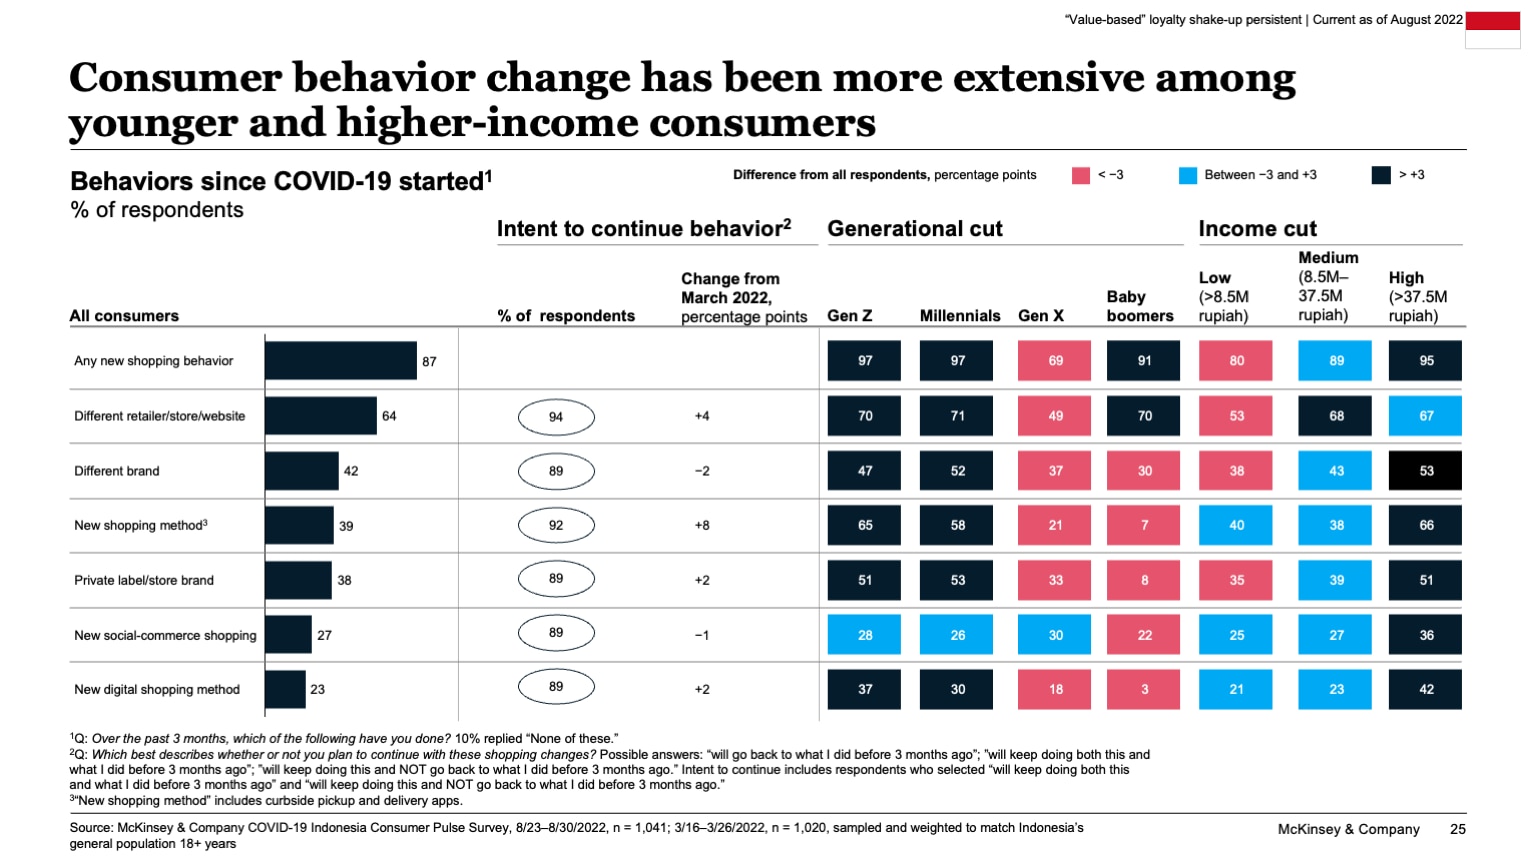 Consumer behavior change has been more extensive among younger and higher-income consumers